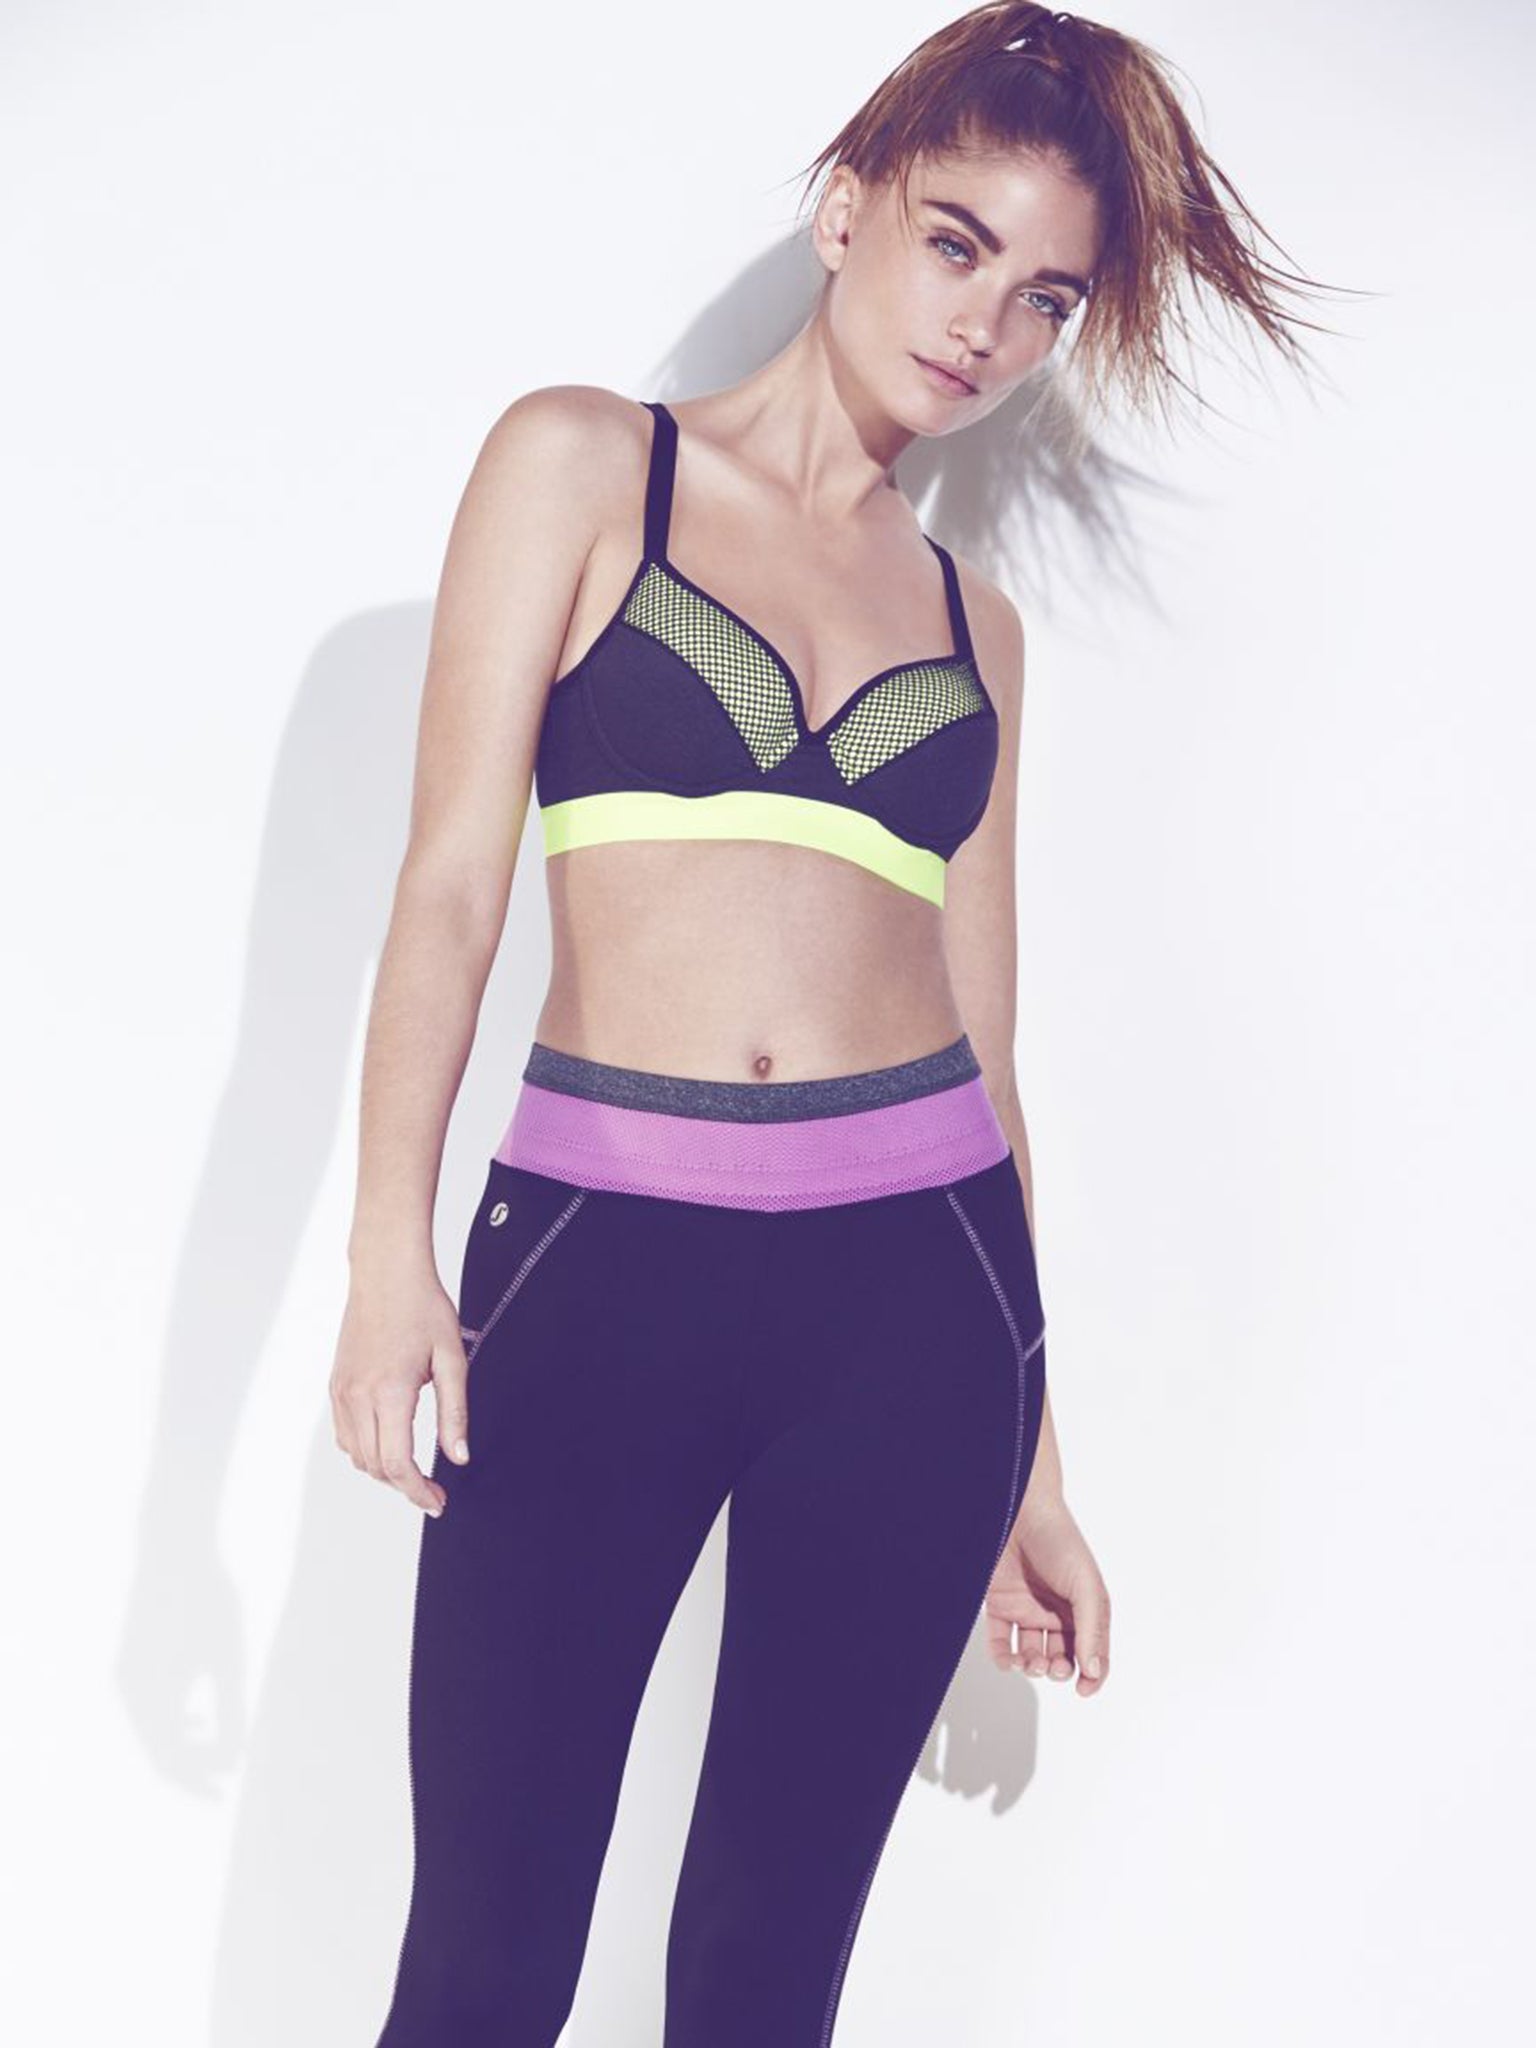 Stylish sportswear to start off the New Year fitness kick, The Independent